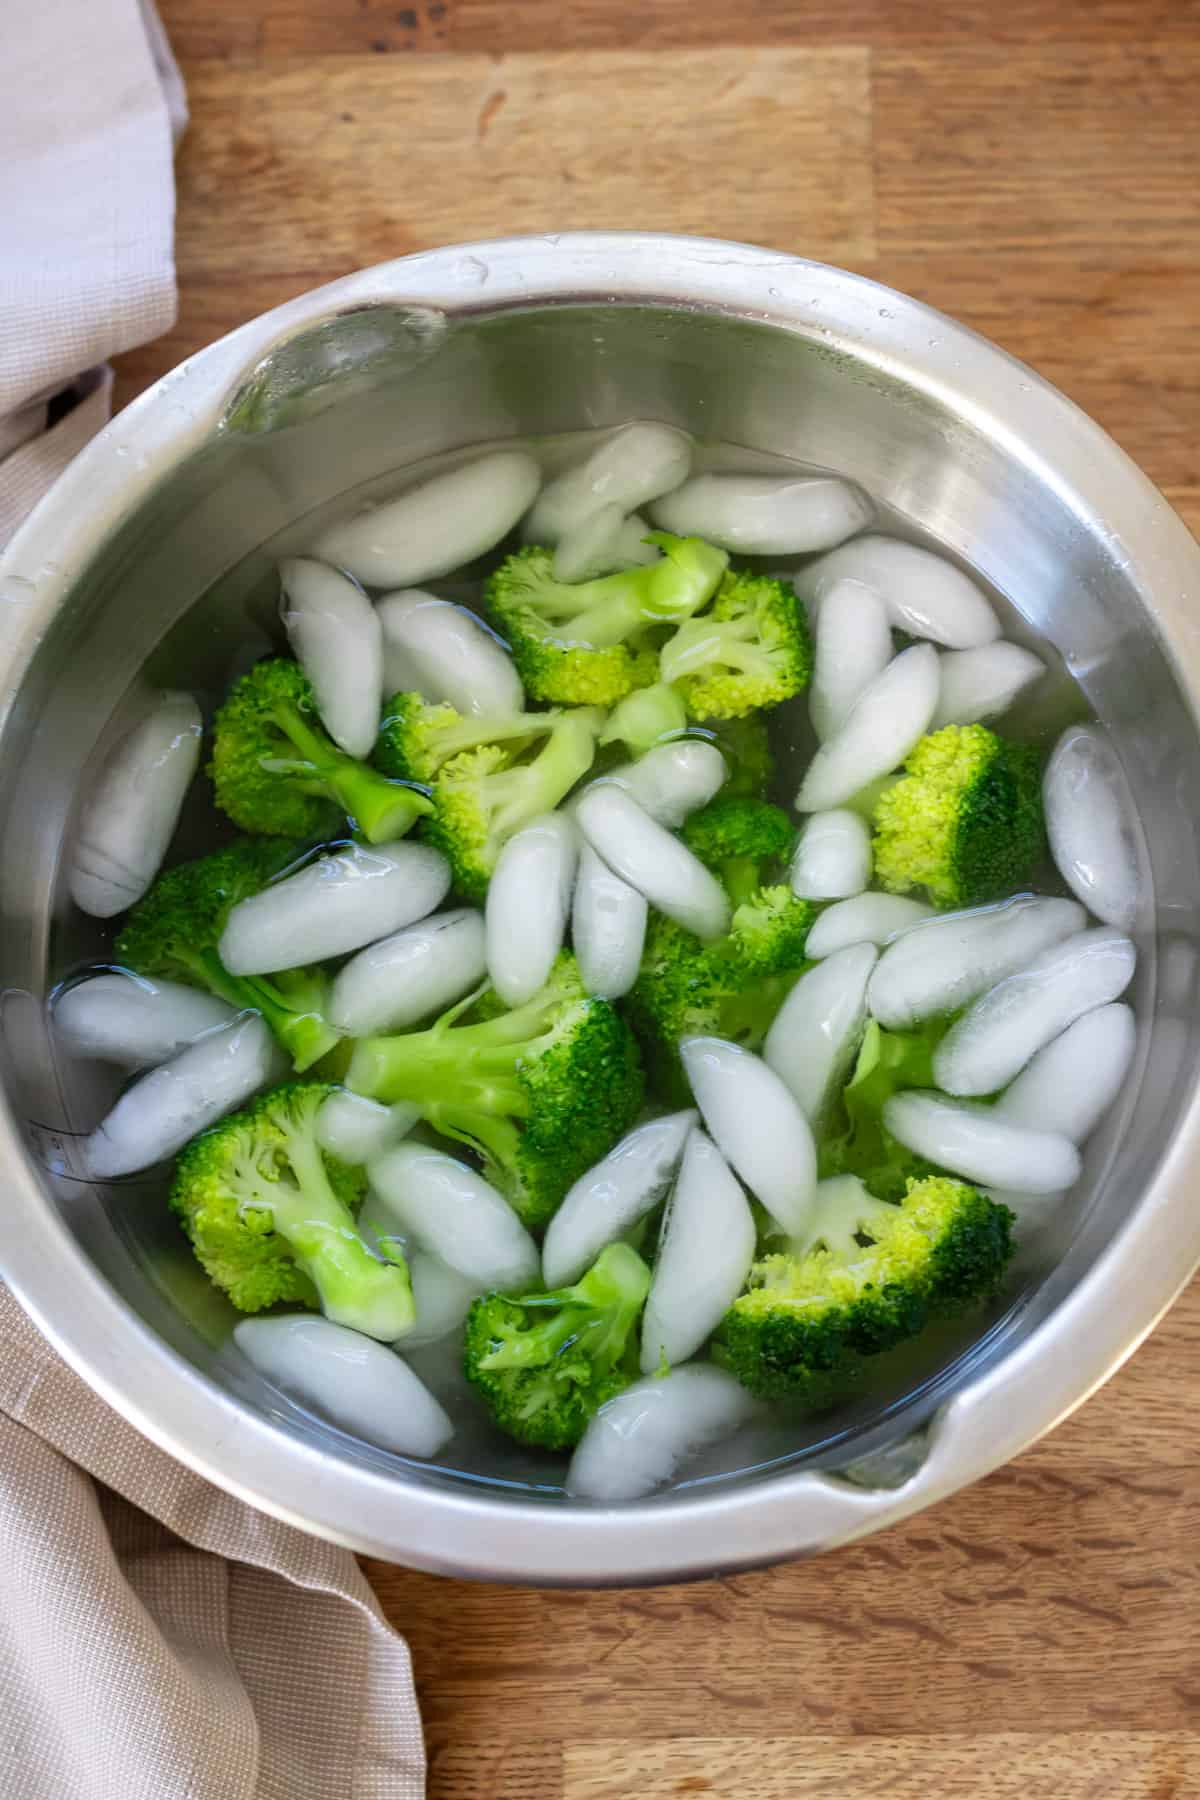 Blanched broccoli in an ice bath.